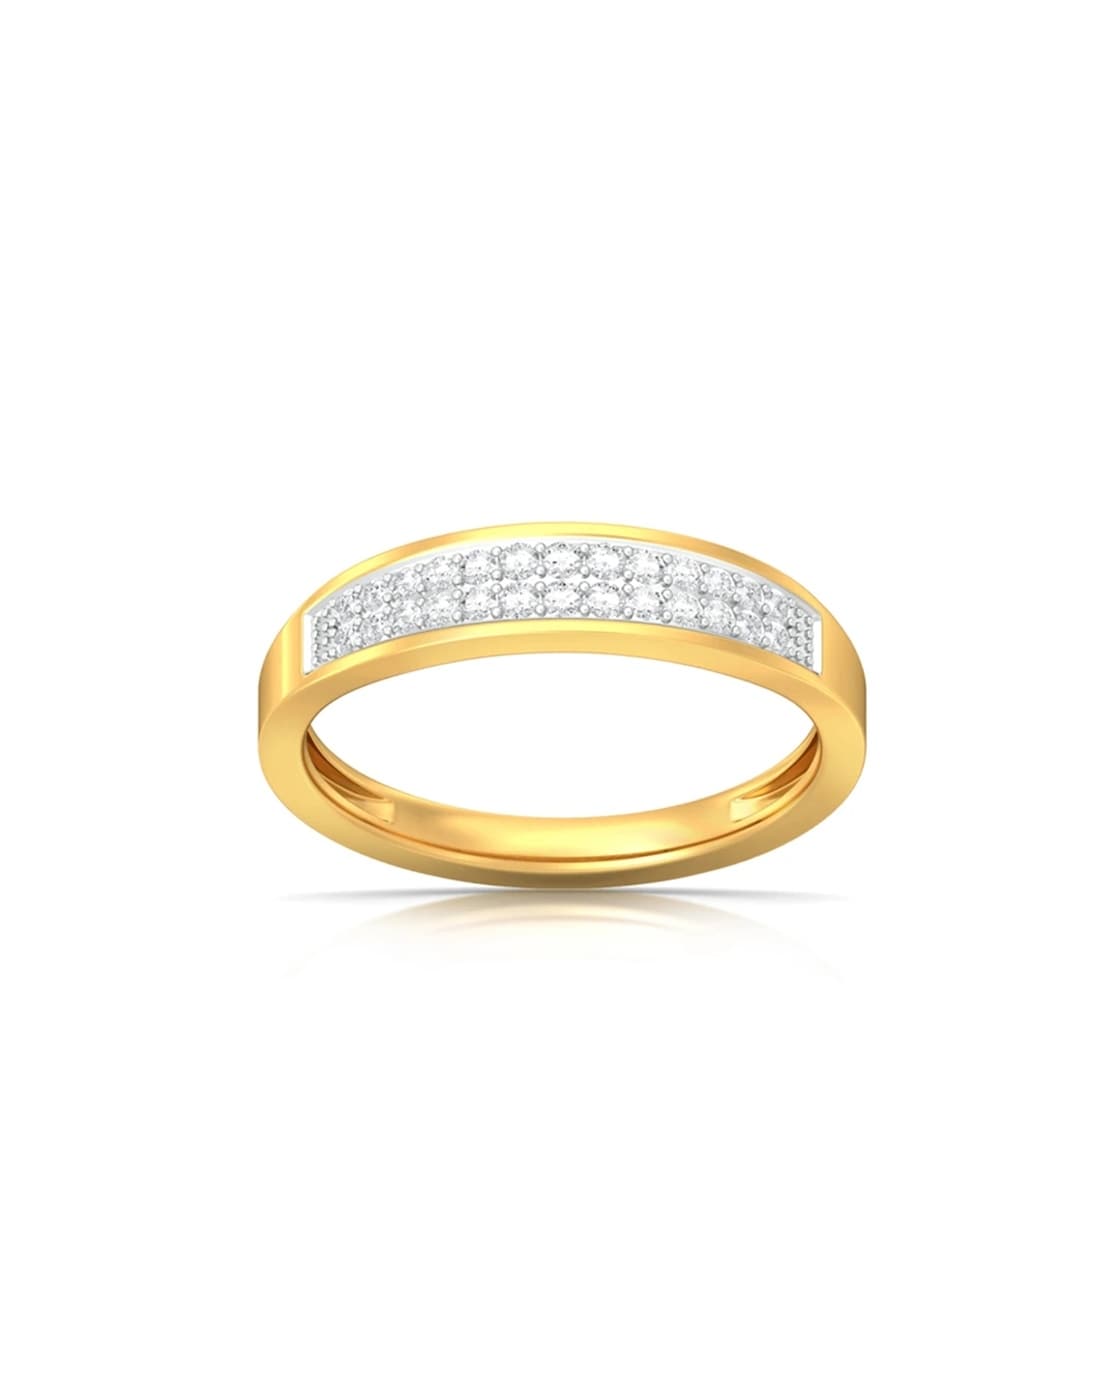 bead ring simple rings couple ring| Alibaba.com